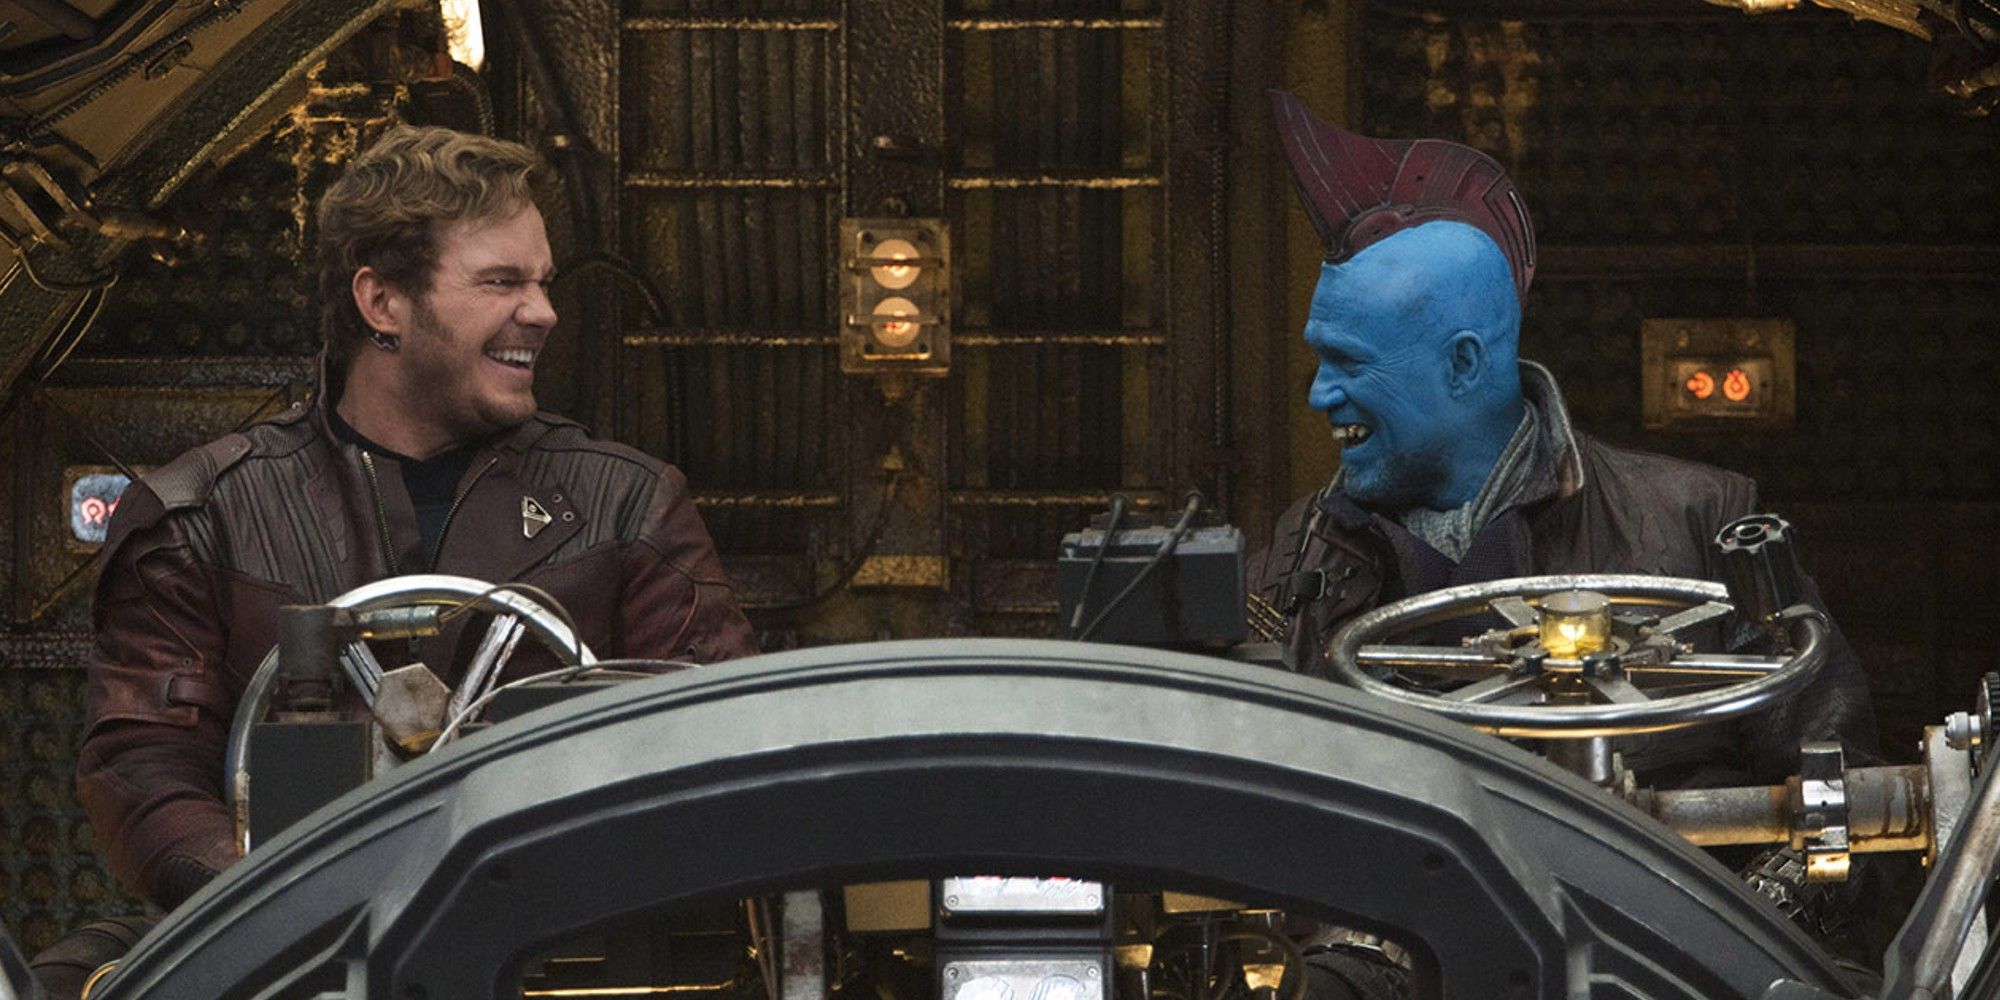 Chris Pratt and Michael Rooker as Peter Quill and Yondu in 'Guardians of the Galaxy 2'